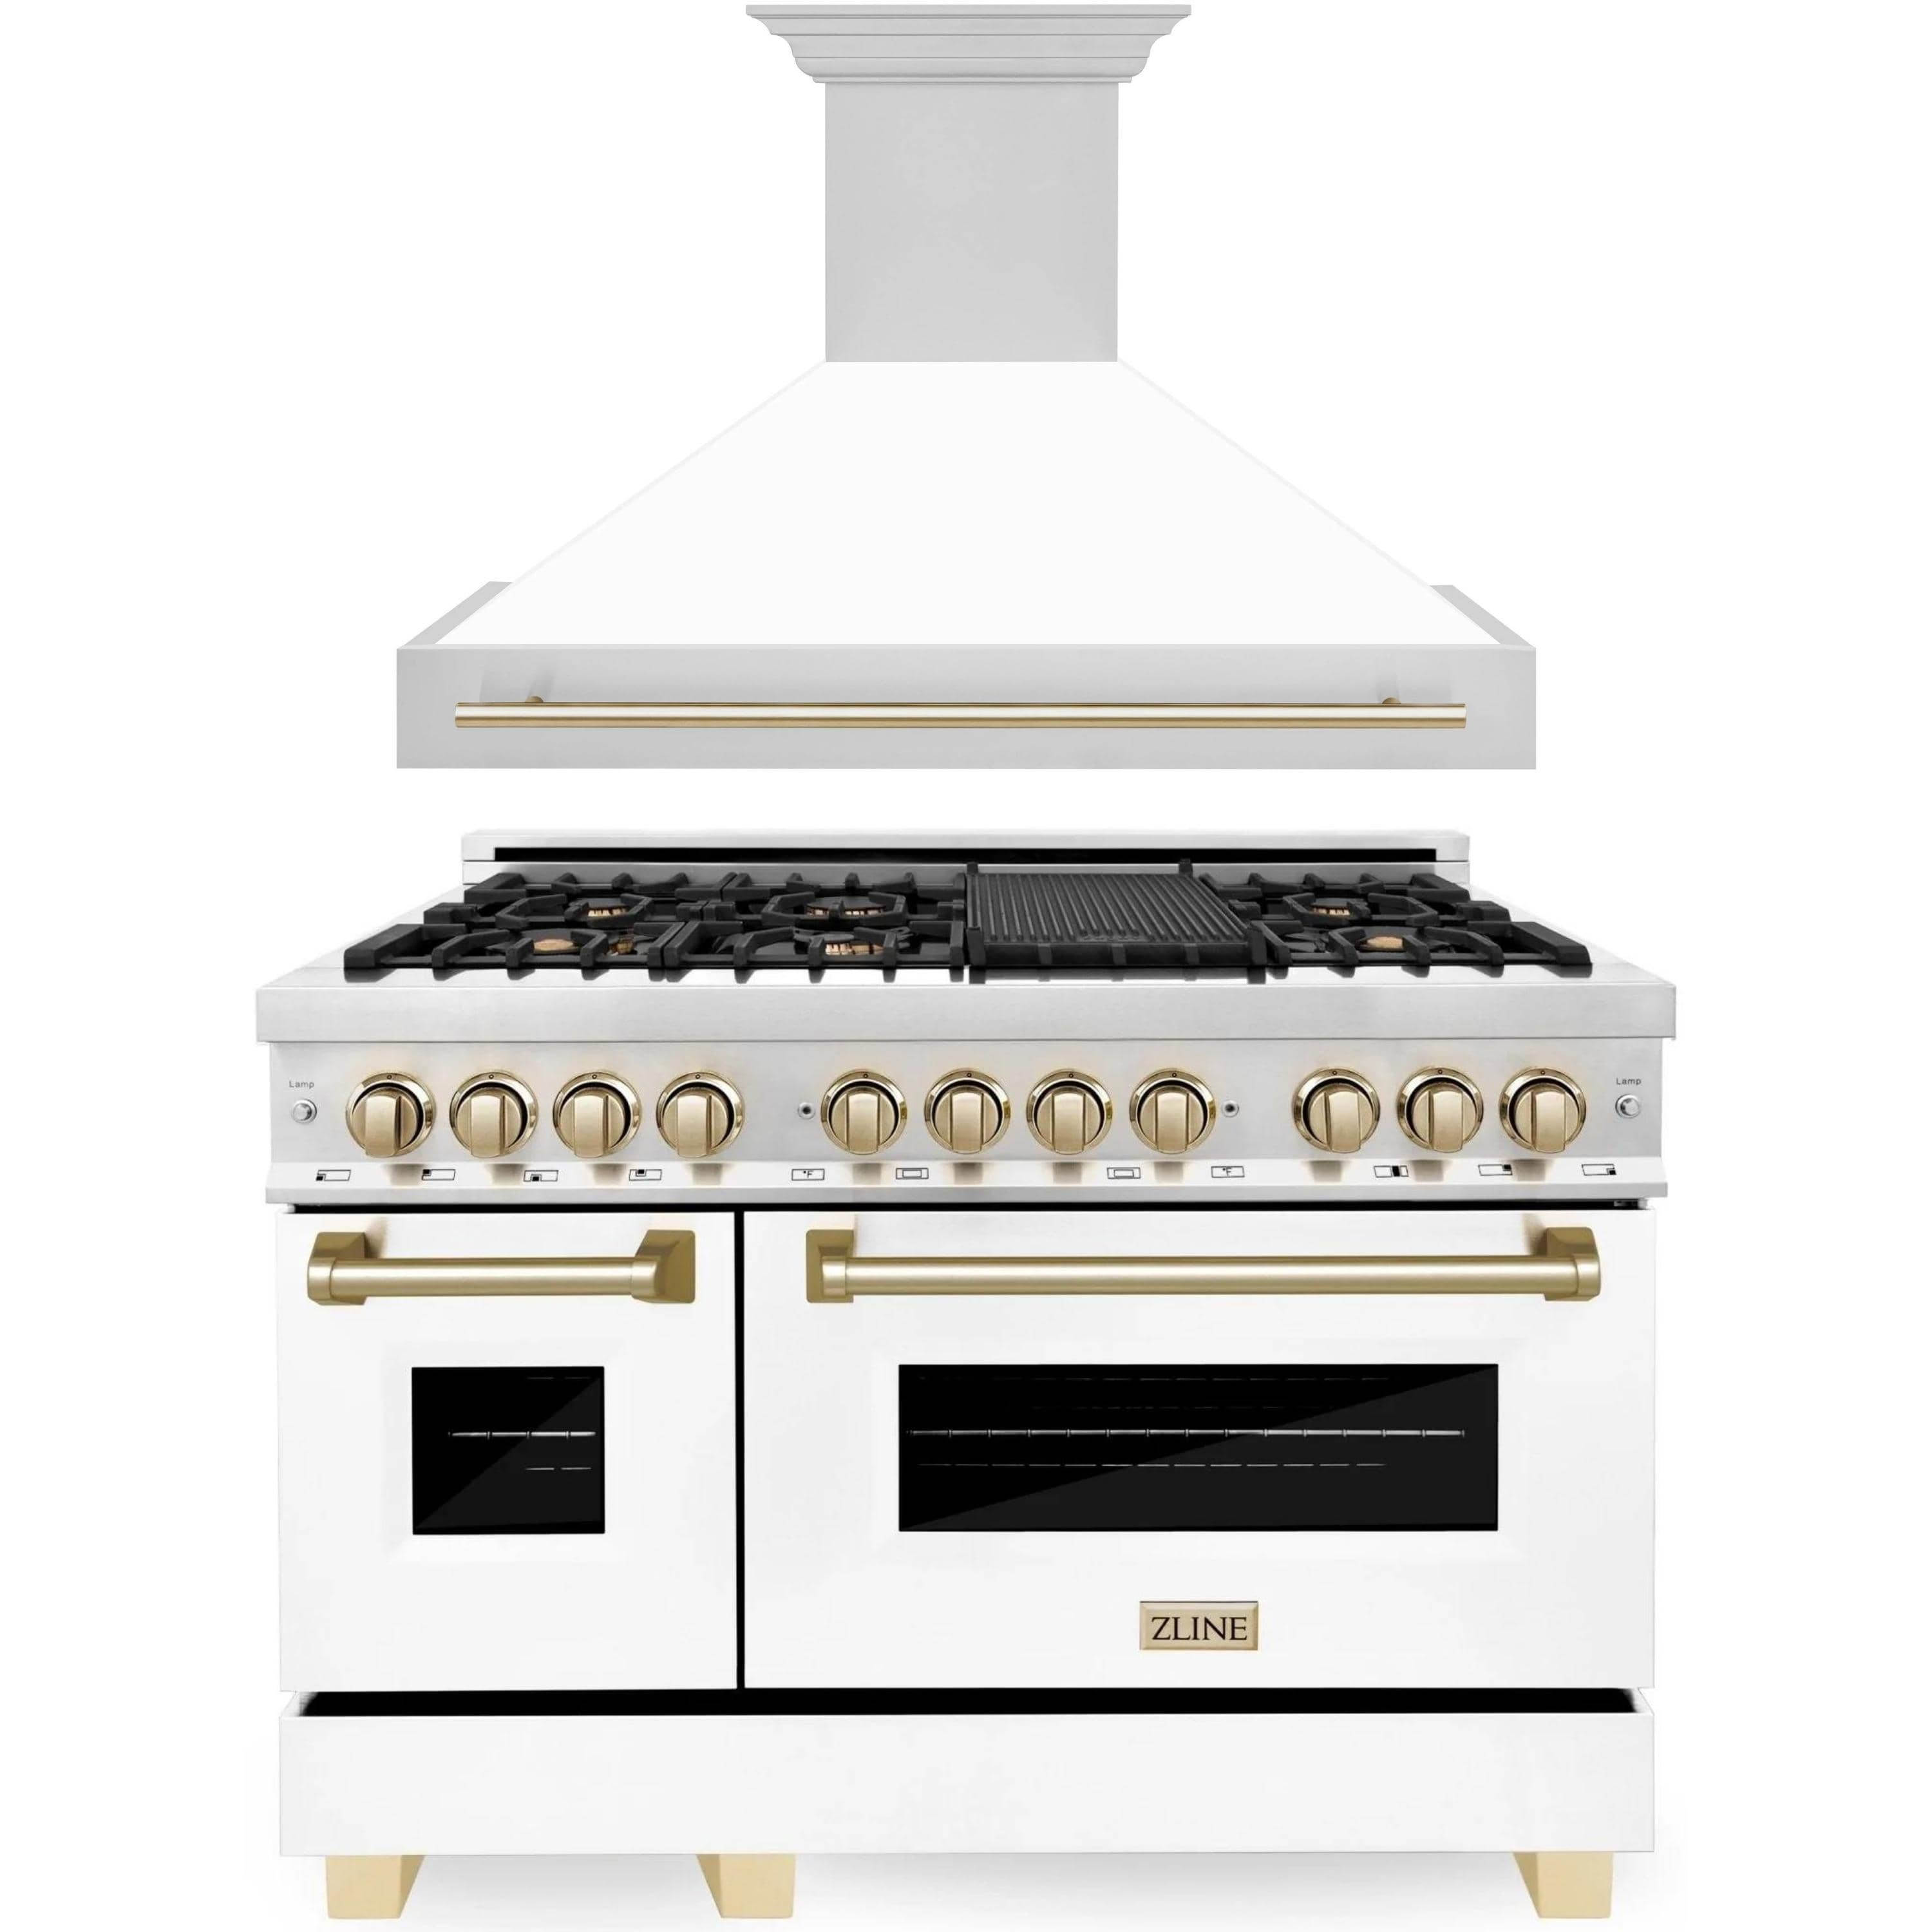 ZLINE Autograph Edition 2-Piece Appliance Package - 48-Inch Dual Fuel Range & Wall Mounted Range Hood in Stainless Steel and White Door with Gold Trim (2AKP-RAWMRH48-G)